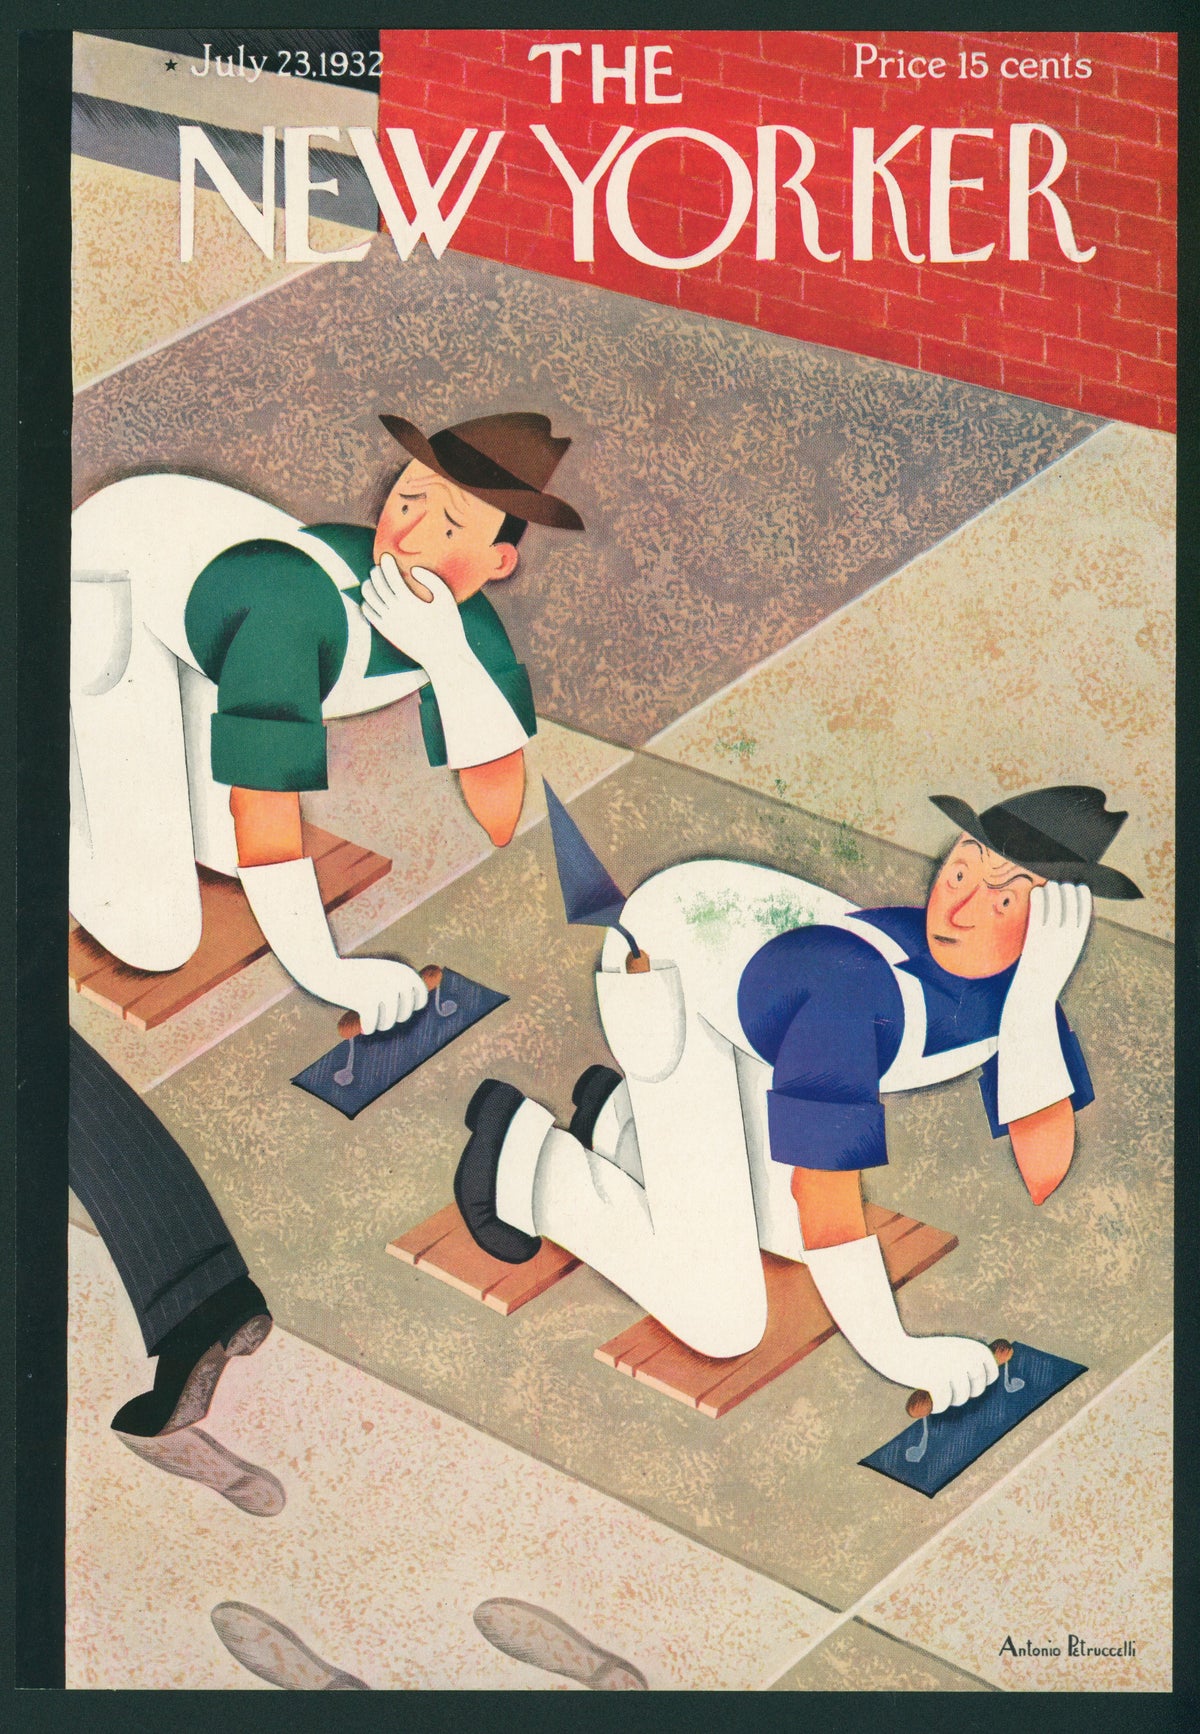 Laying Pavement- The New Yorker - Authentic Vintage Antique Print